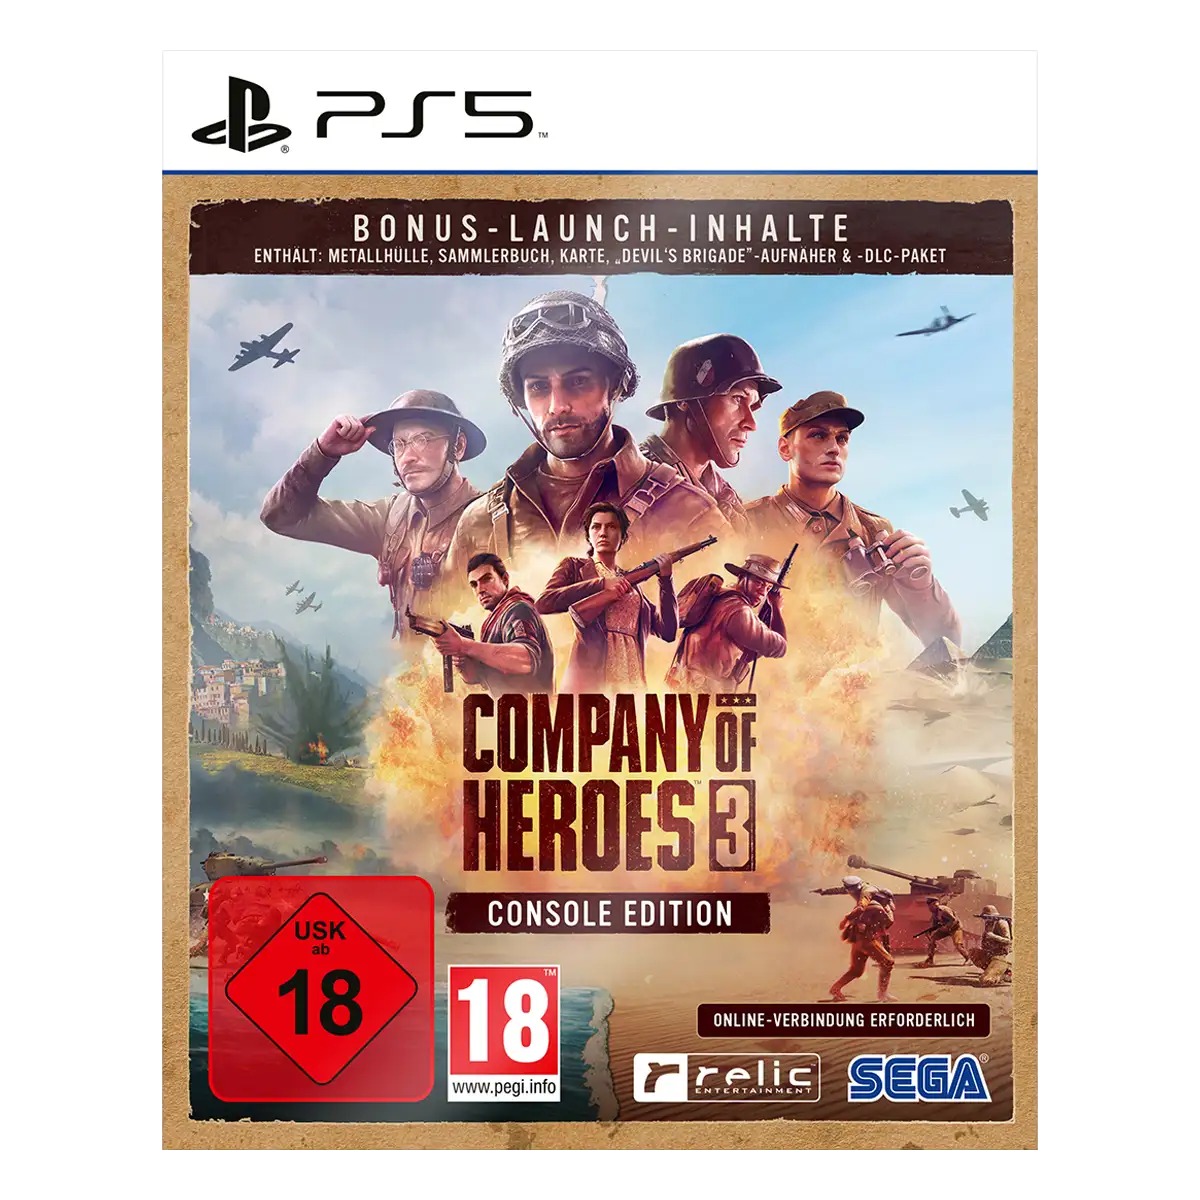 Company of Heroes 3 Launch Edition (Metal Case) (PS5)